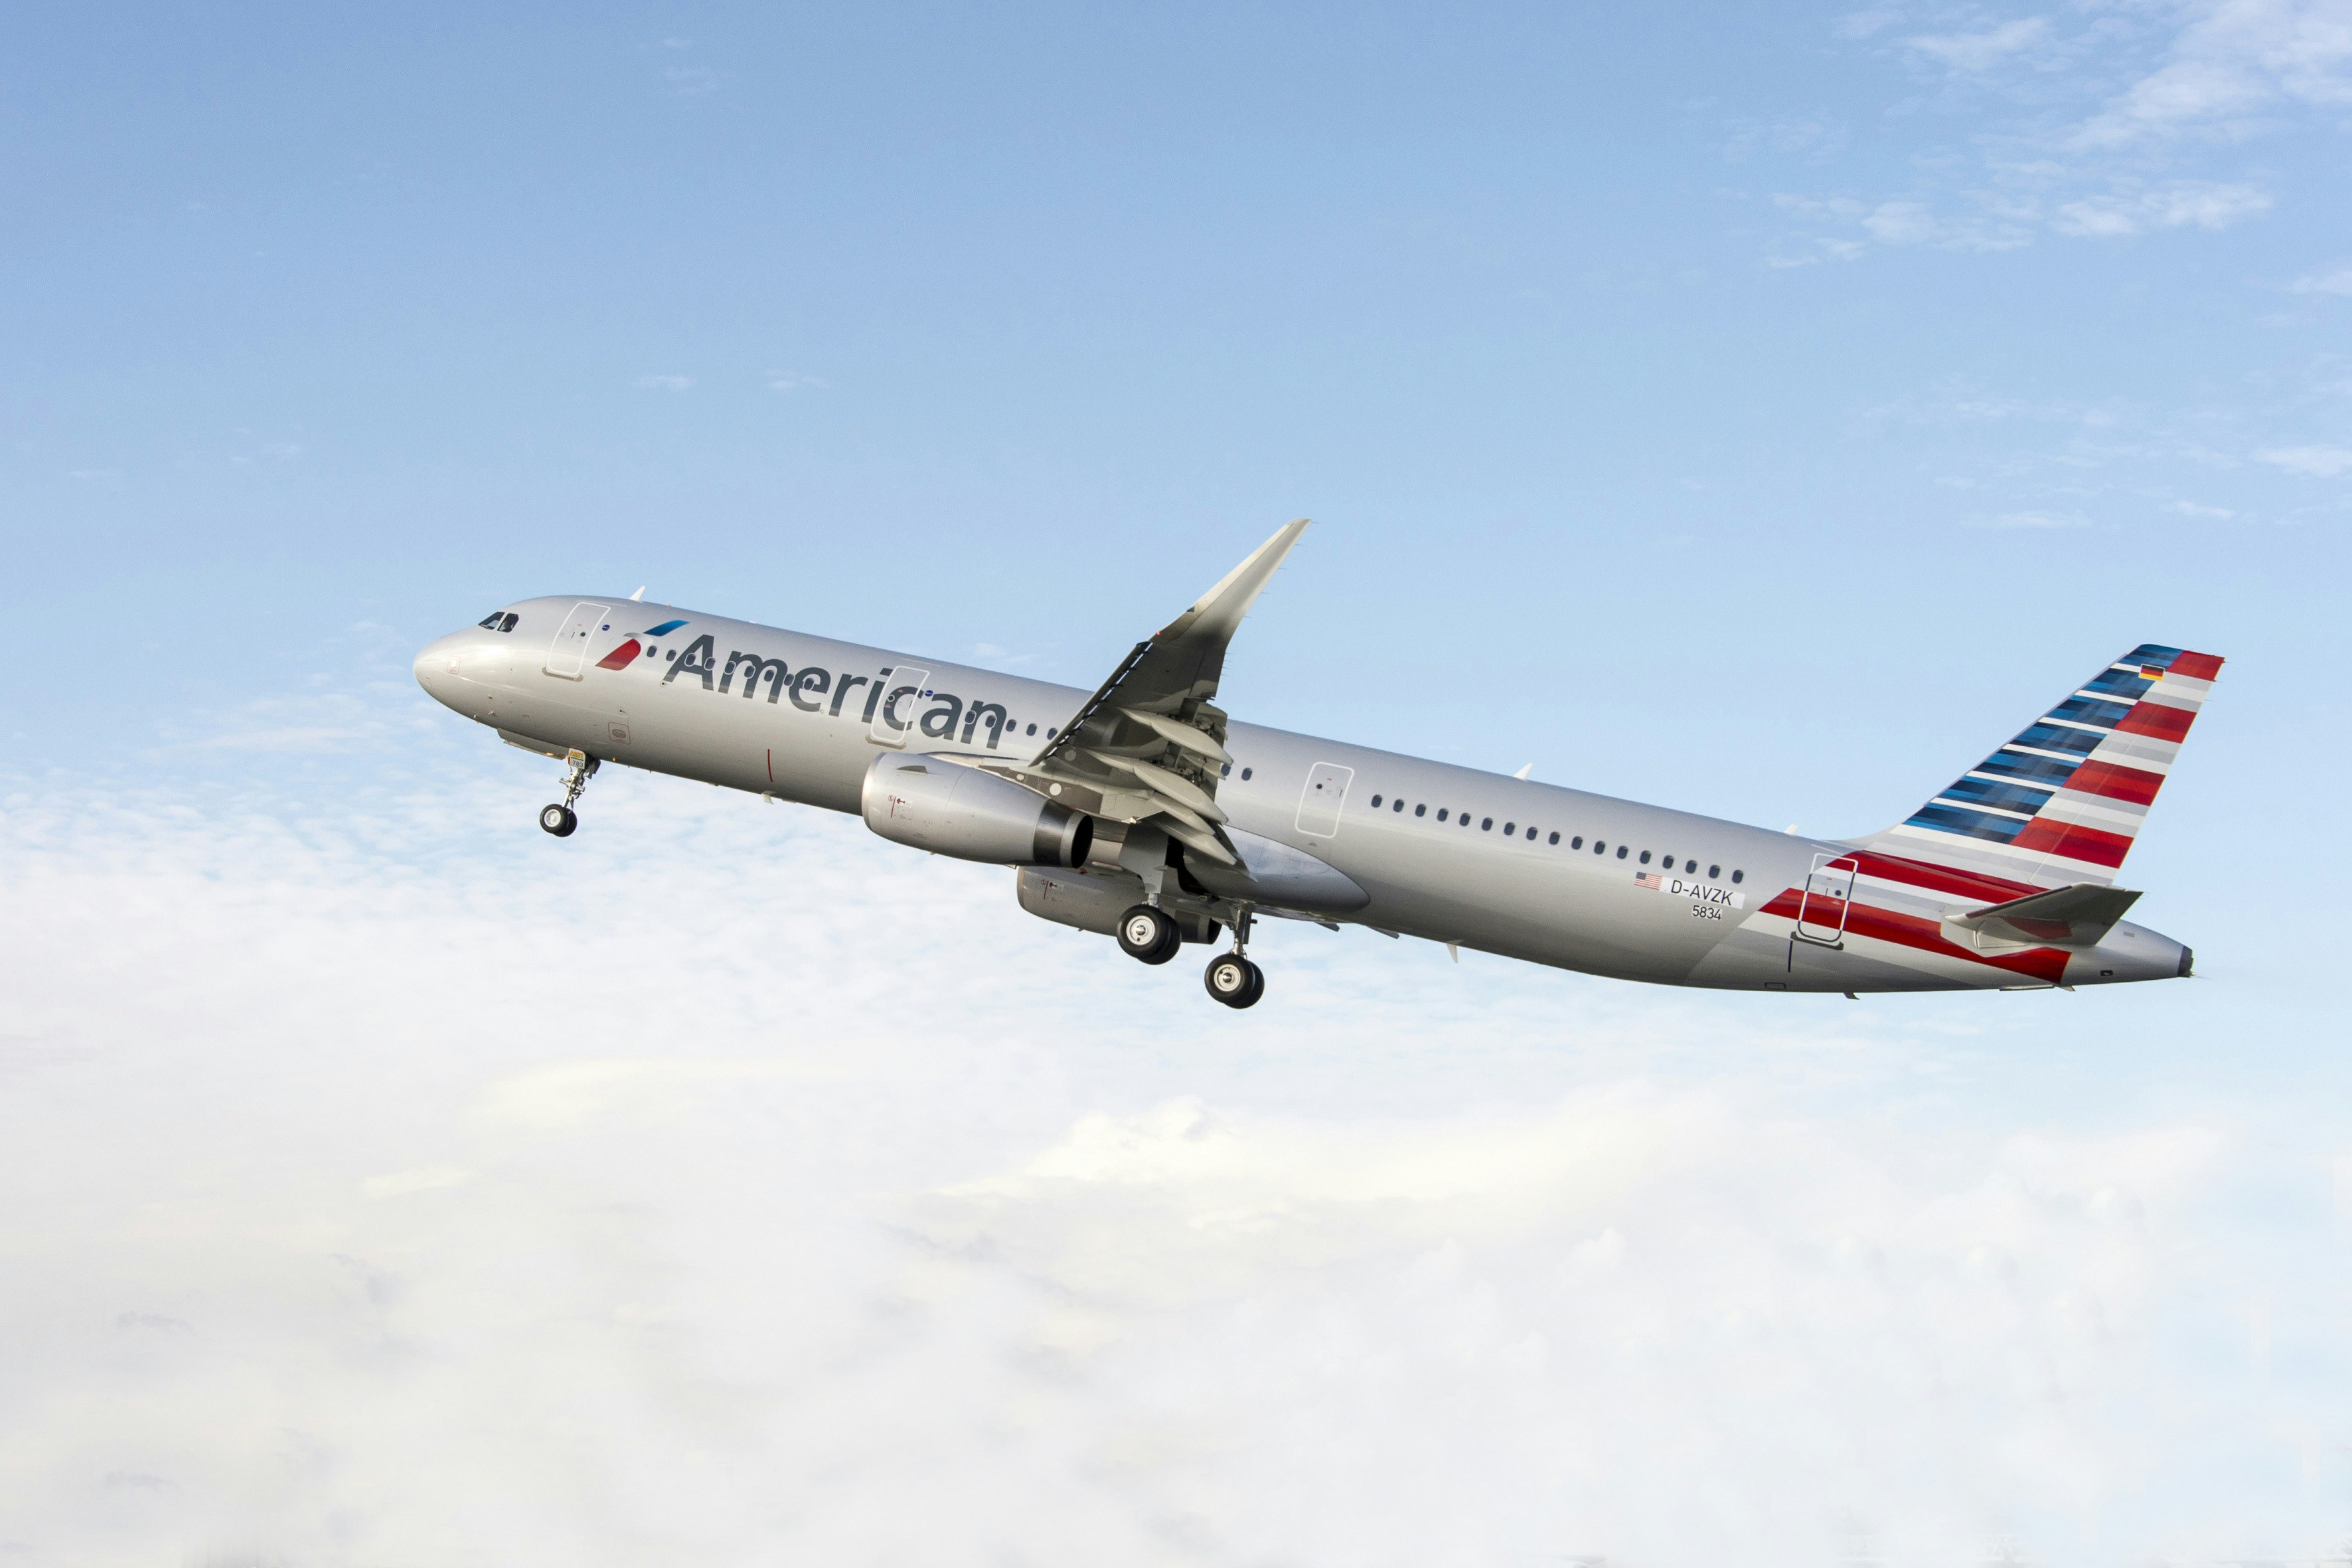 An American Airlines plane in mid-air